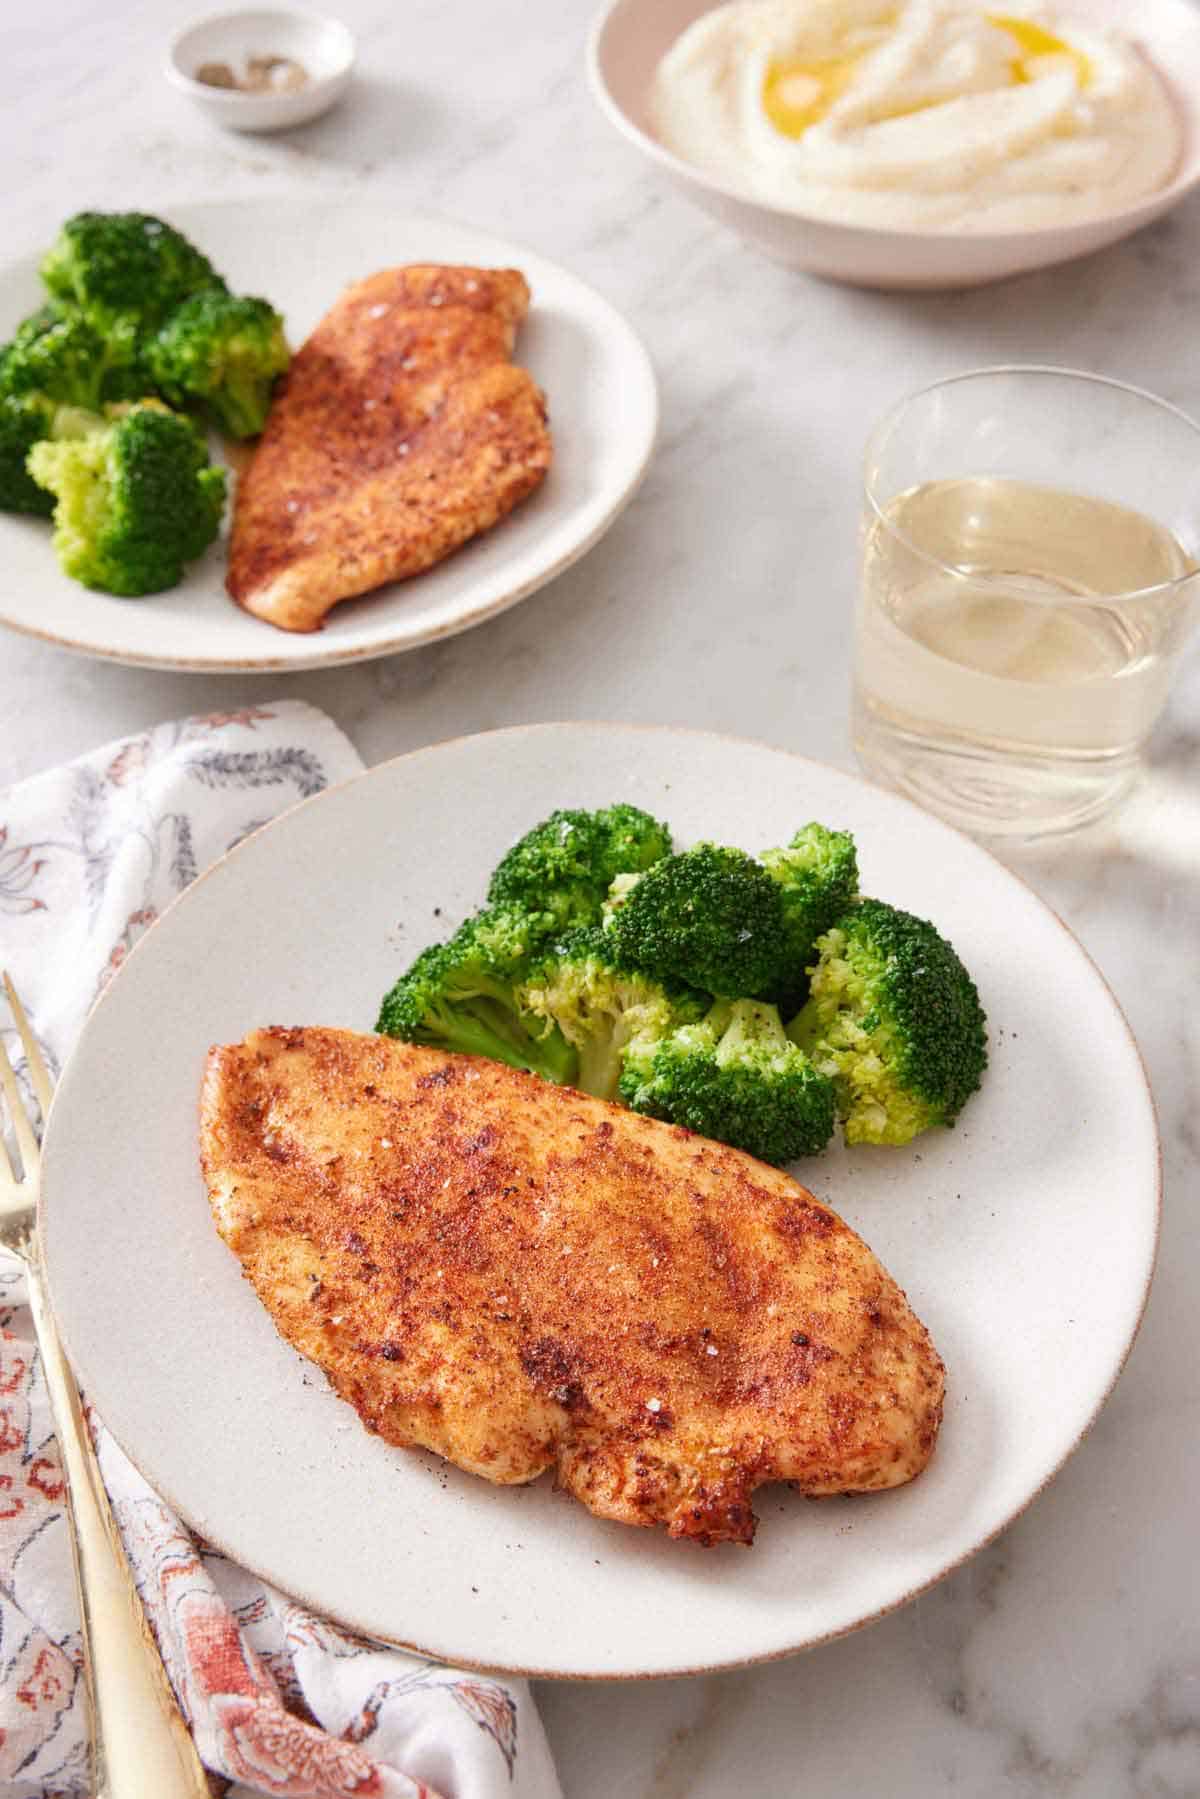 Two plates of air fryer chicken breasts with a side of broccoli. A drink and bowl of mashed potatoes in the background.